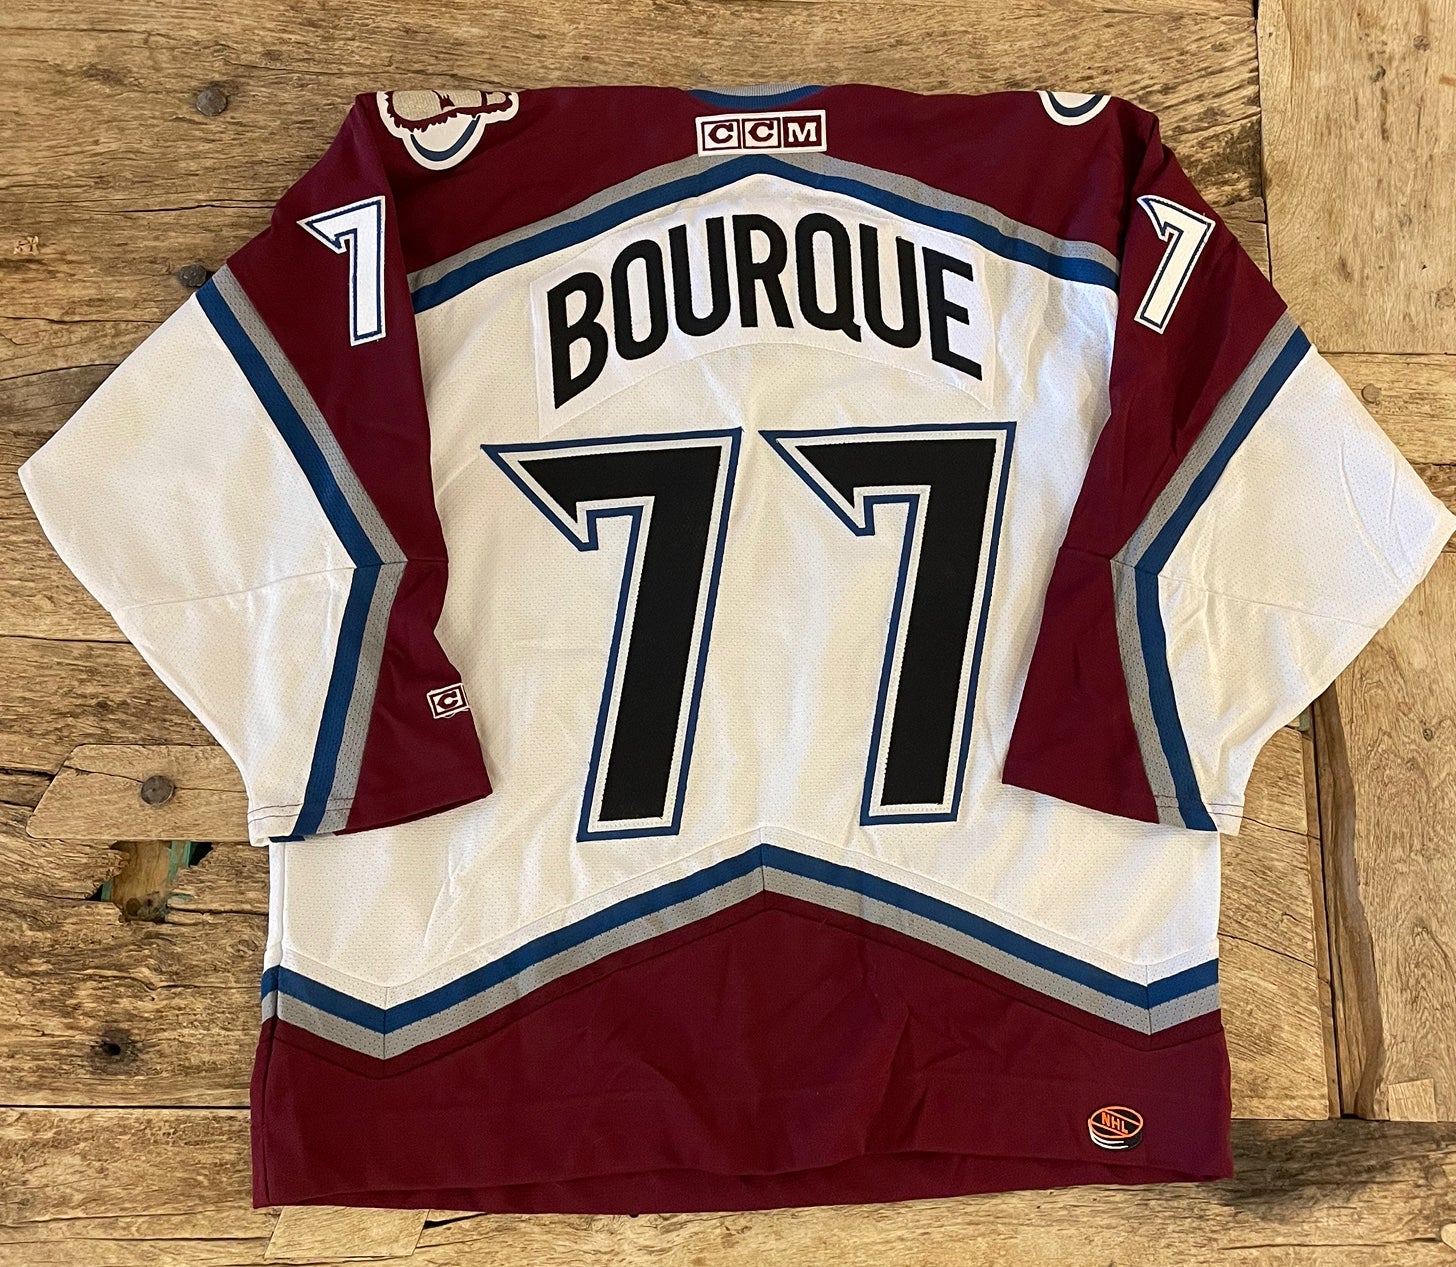 I have some 2001 Avalanche Stanley Cup jerseys in the collection